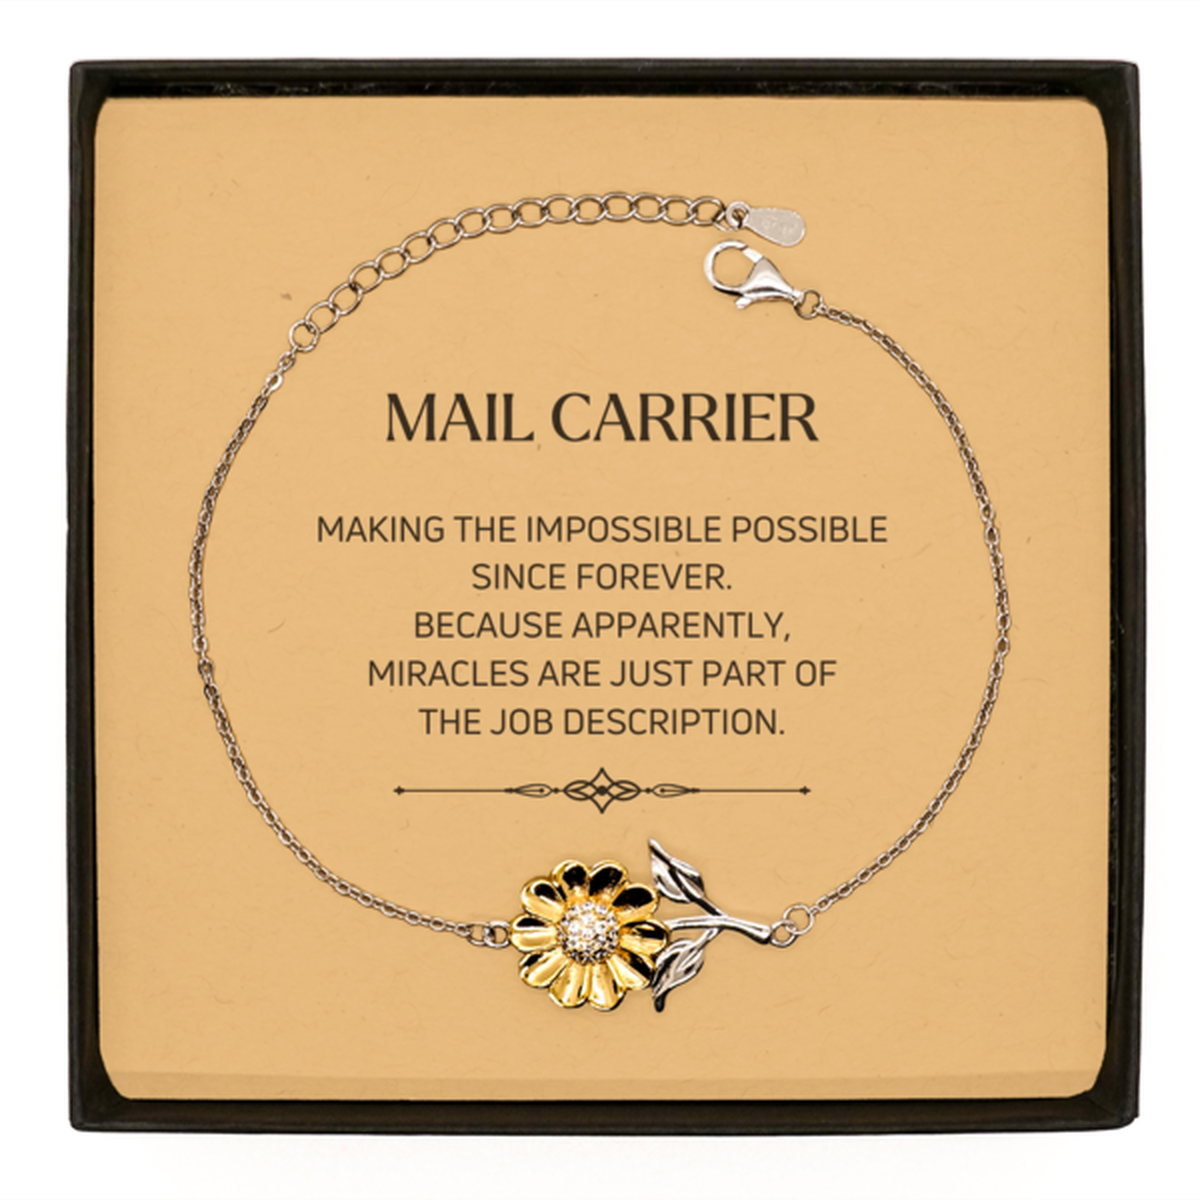 Funny Mail Carrier Gifts, Miracles are just part of the job description, Inspirational Birthday Sunflower Bracelet For Mail Carrier, Men, Women, Coworkers, Friends, Boss